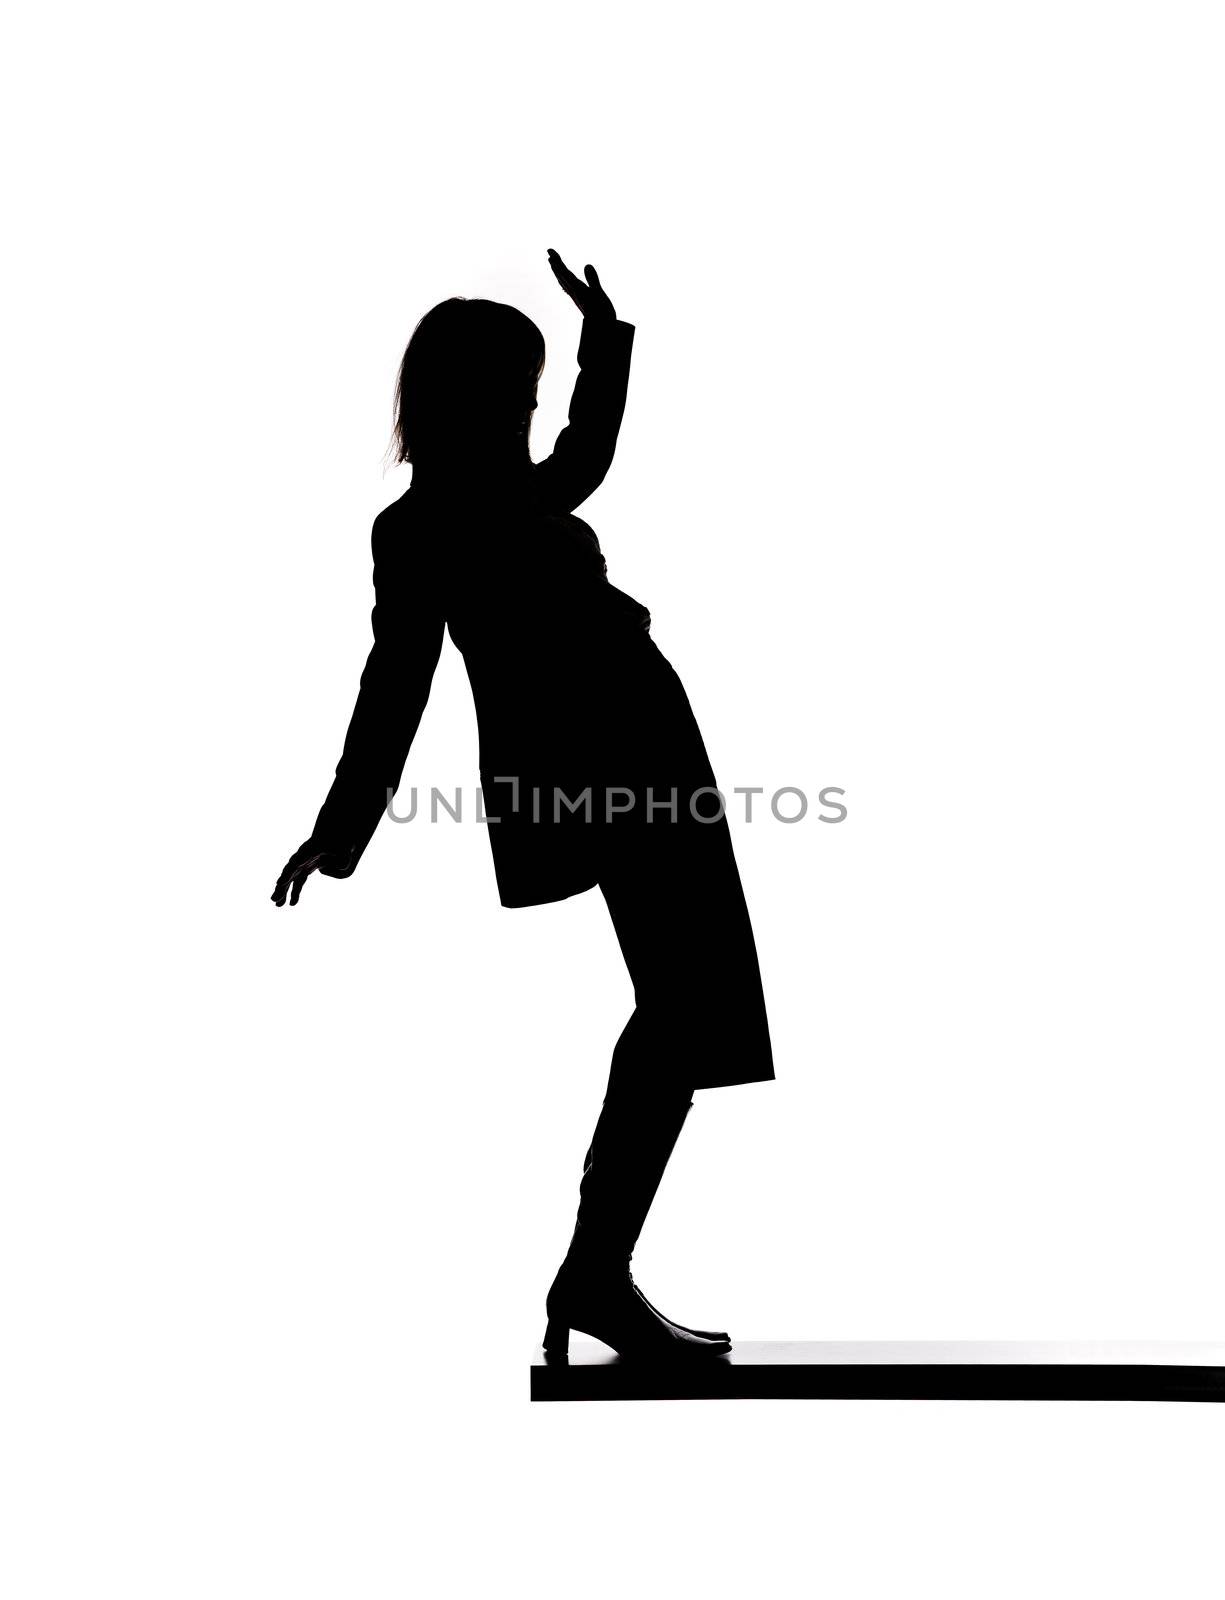 Silhouette of a woman close to fall down by gemenacom